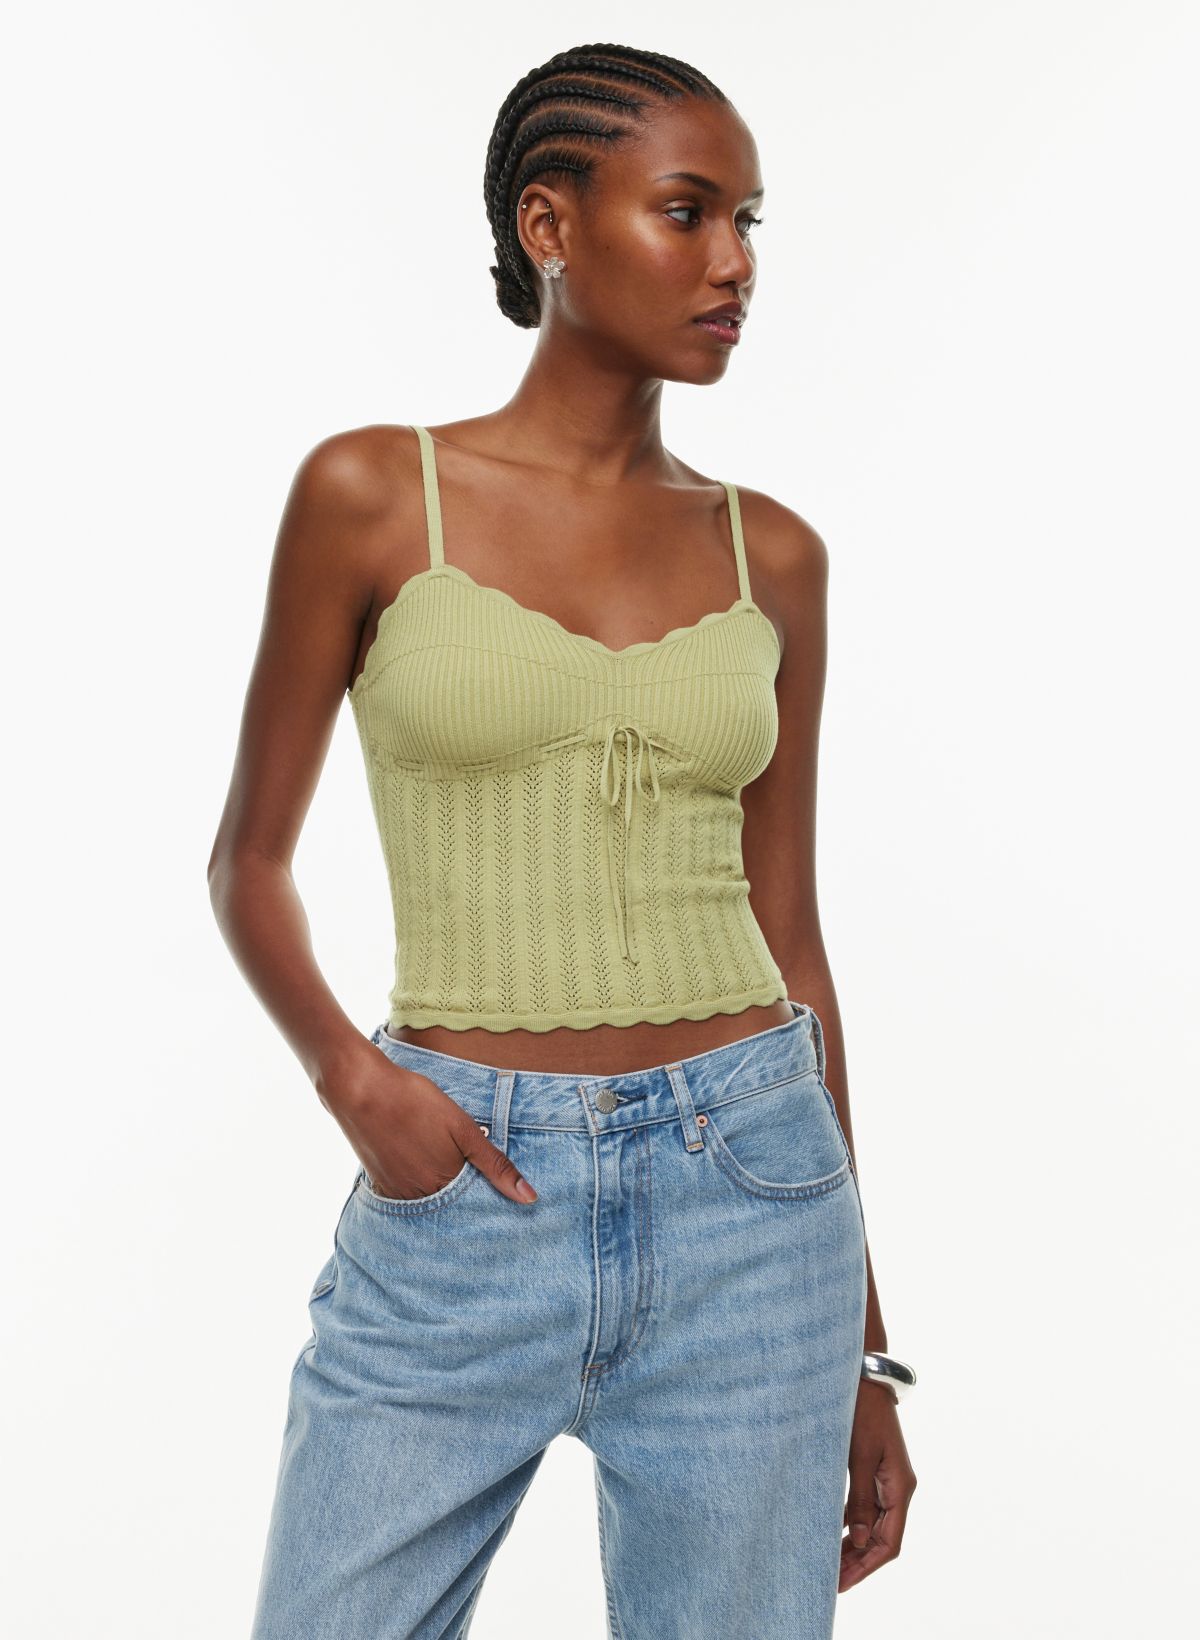 MATCHING KNIT CAMISOLE TOP - Sea green